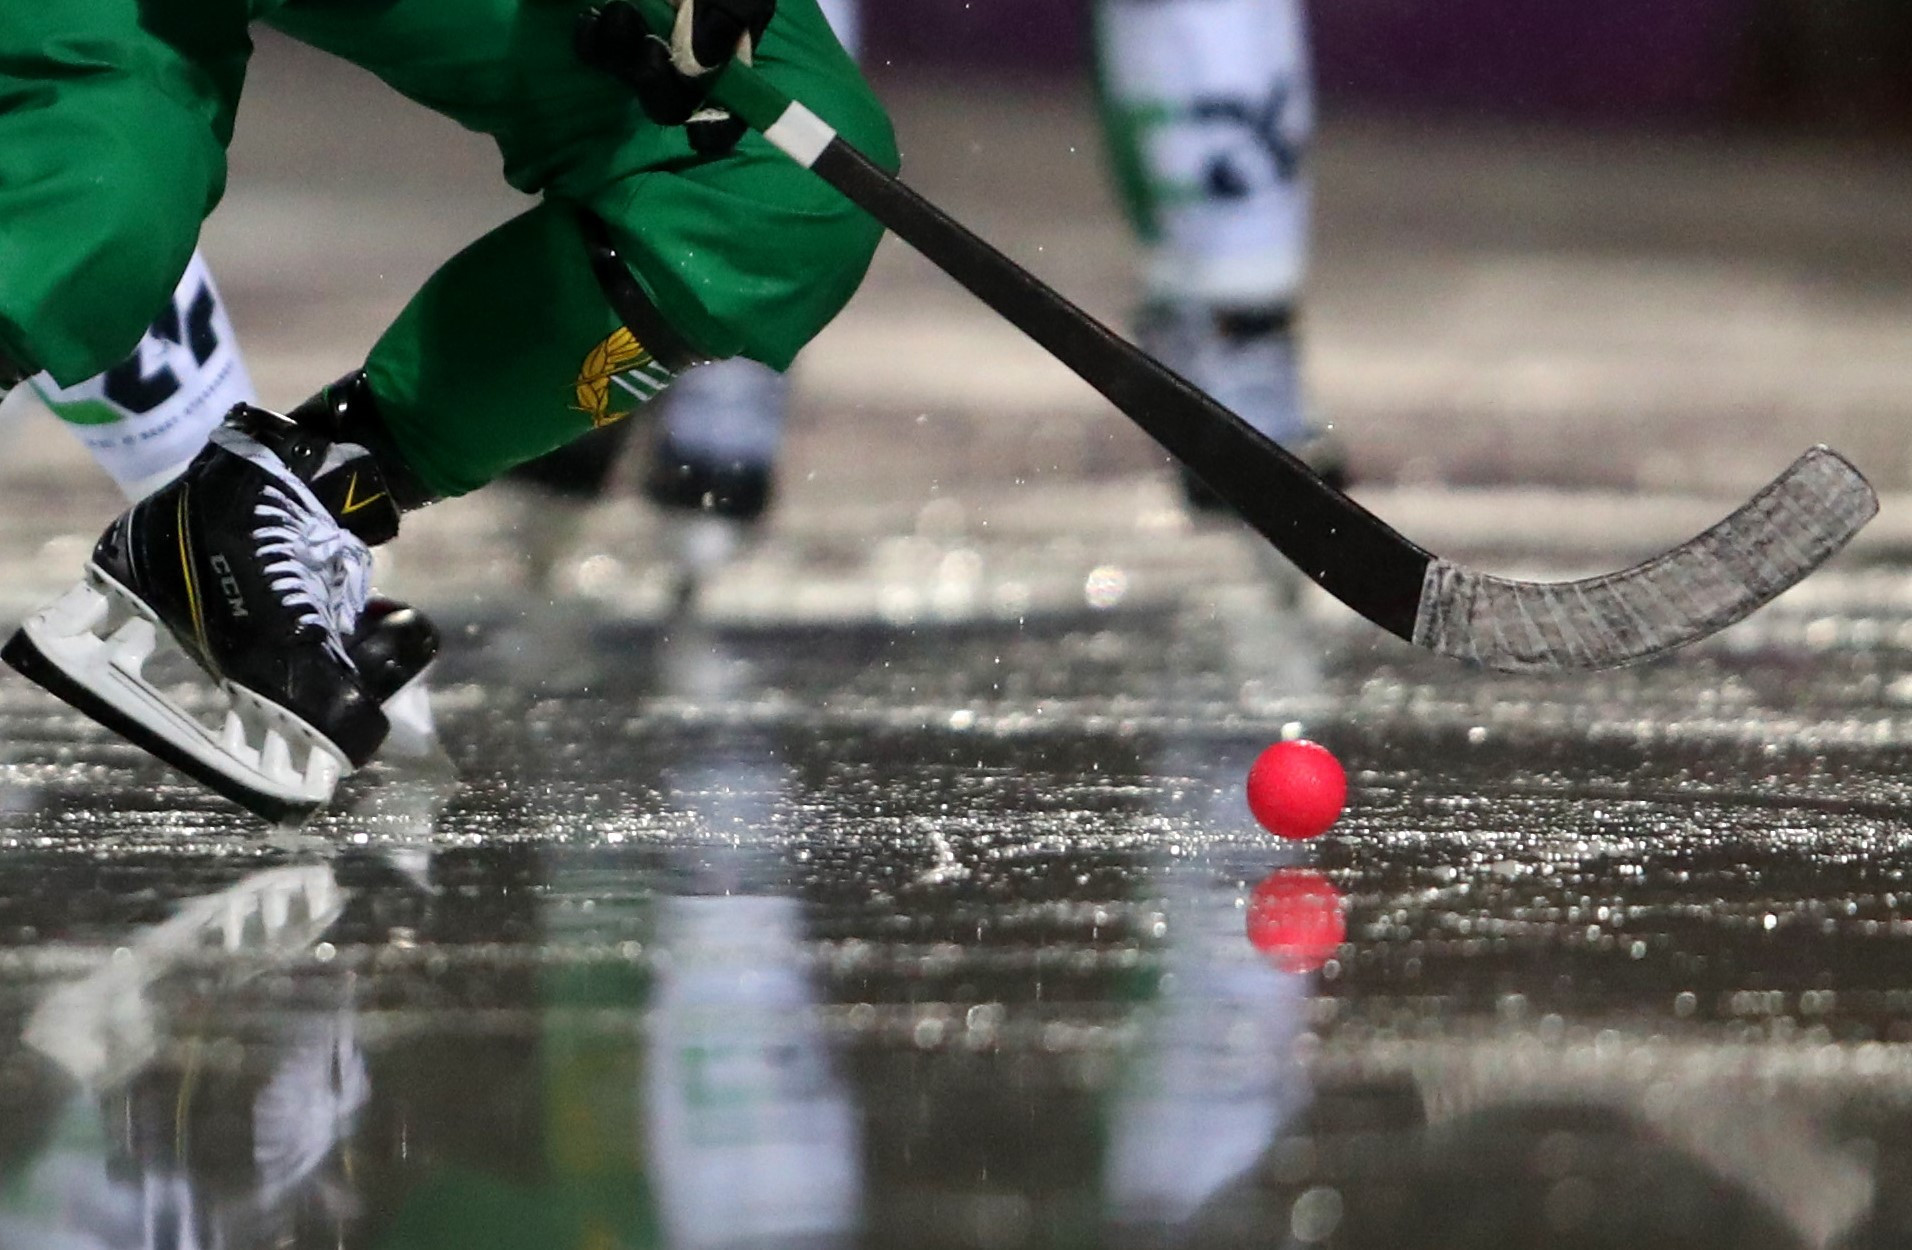 Sweden and Finland have announced they will not send teams to next month's men's World Bandy Championships in Syktyvkar, citing the military invasion of Ukraine ©Getty Images